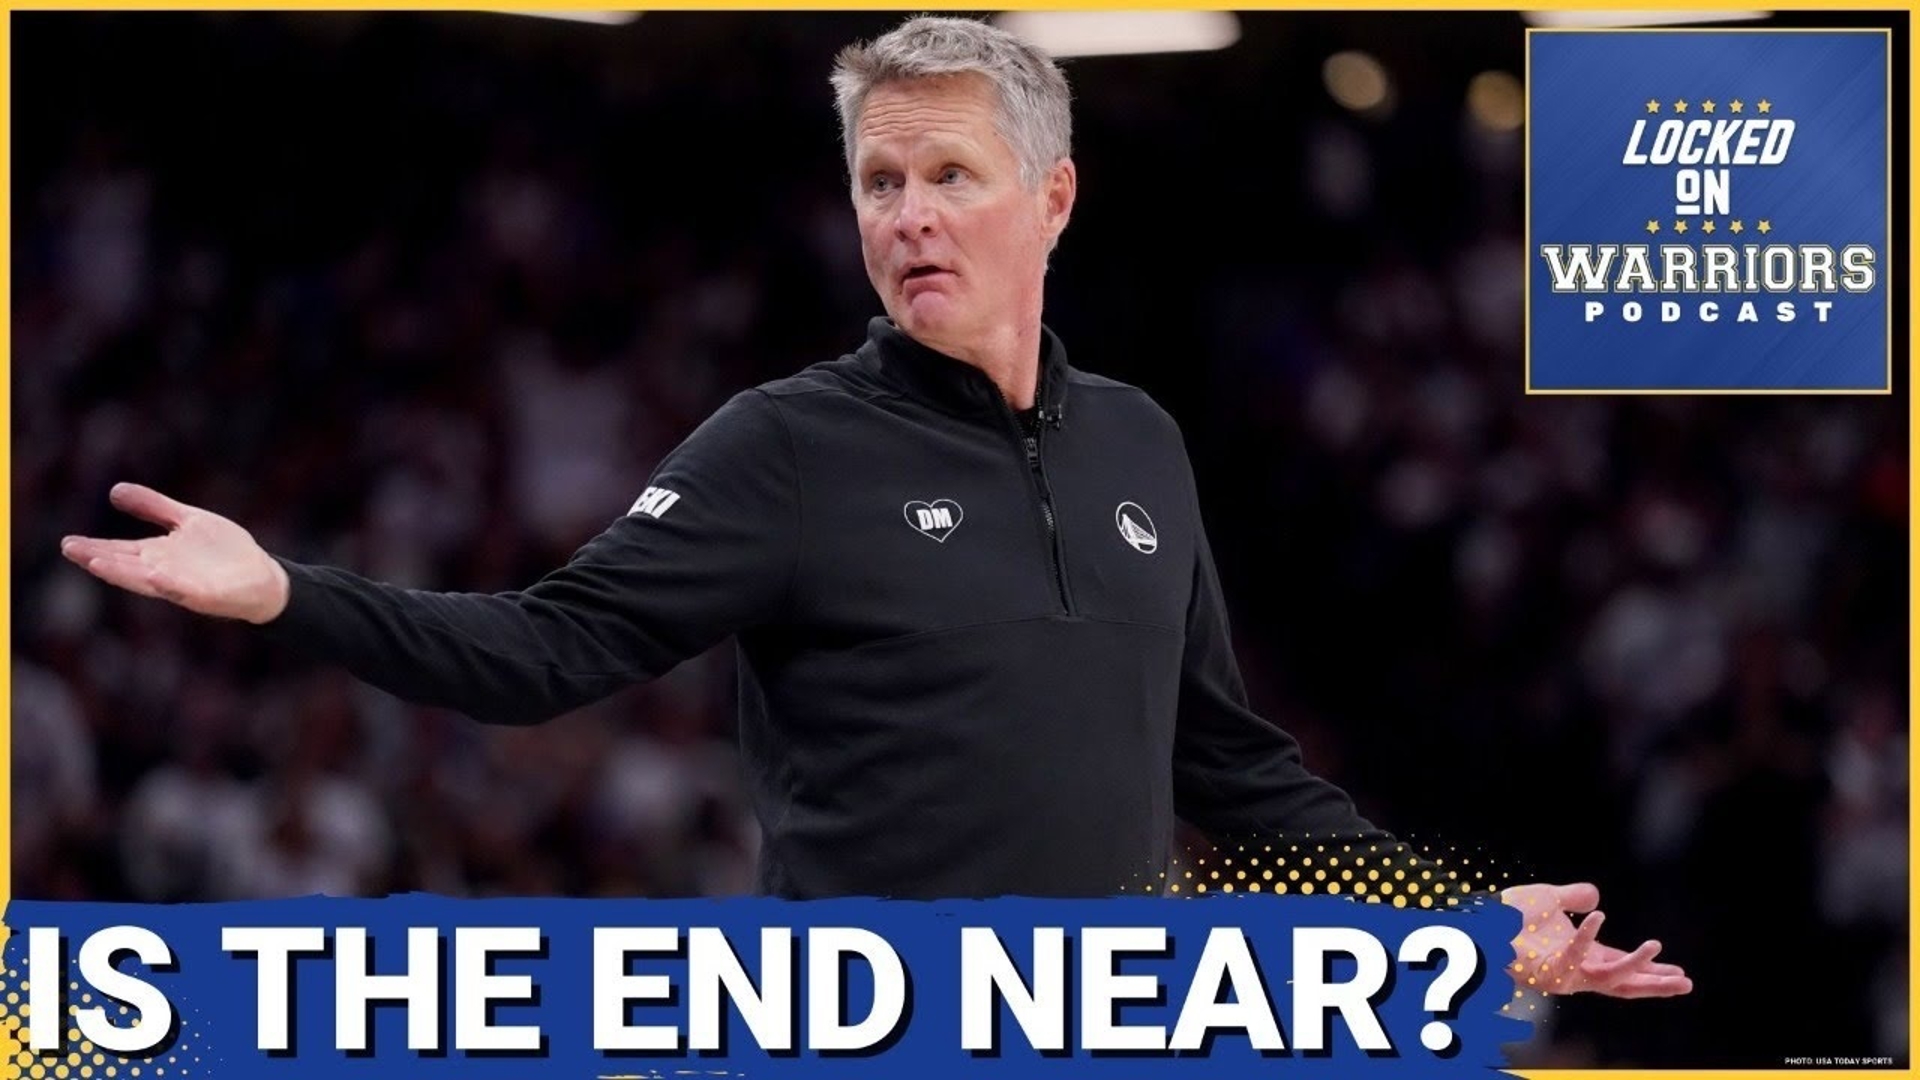 Cyrus Saatsaz hosts a Saturday afternoon live edition to analyze Steve Kerr's recent comments regarding his future as the Head Coach of the Golden State Warriors.